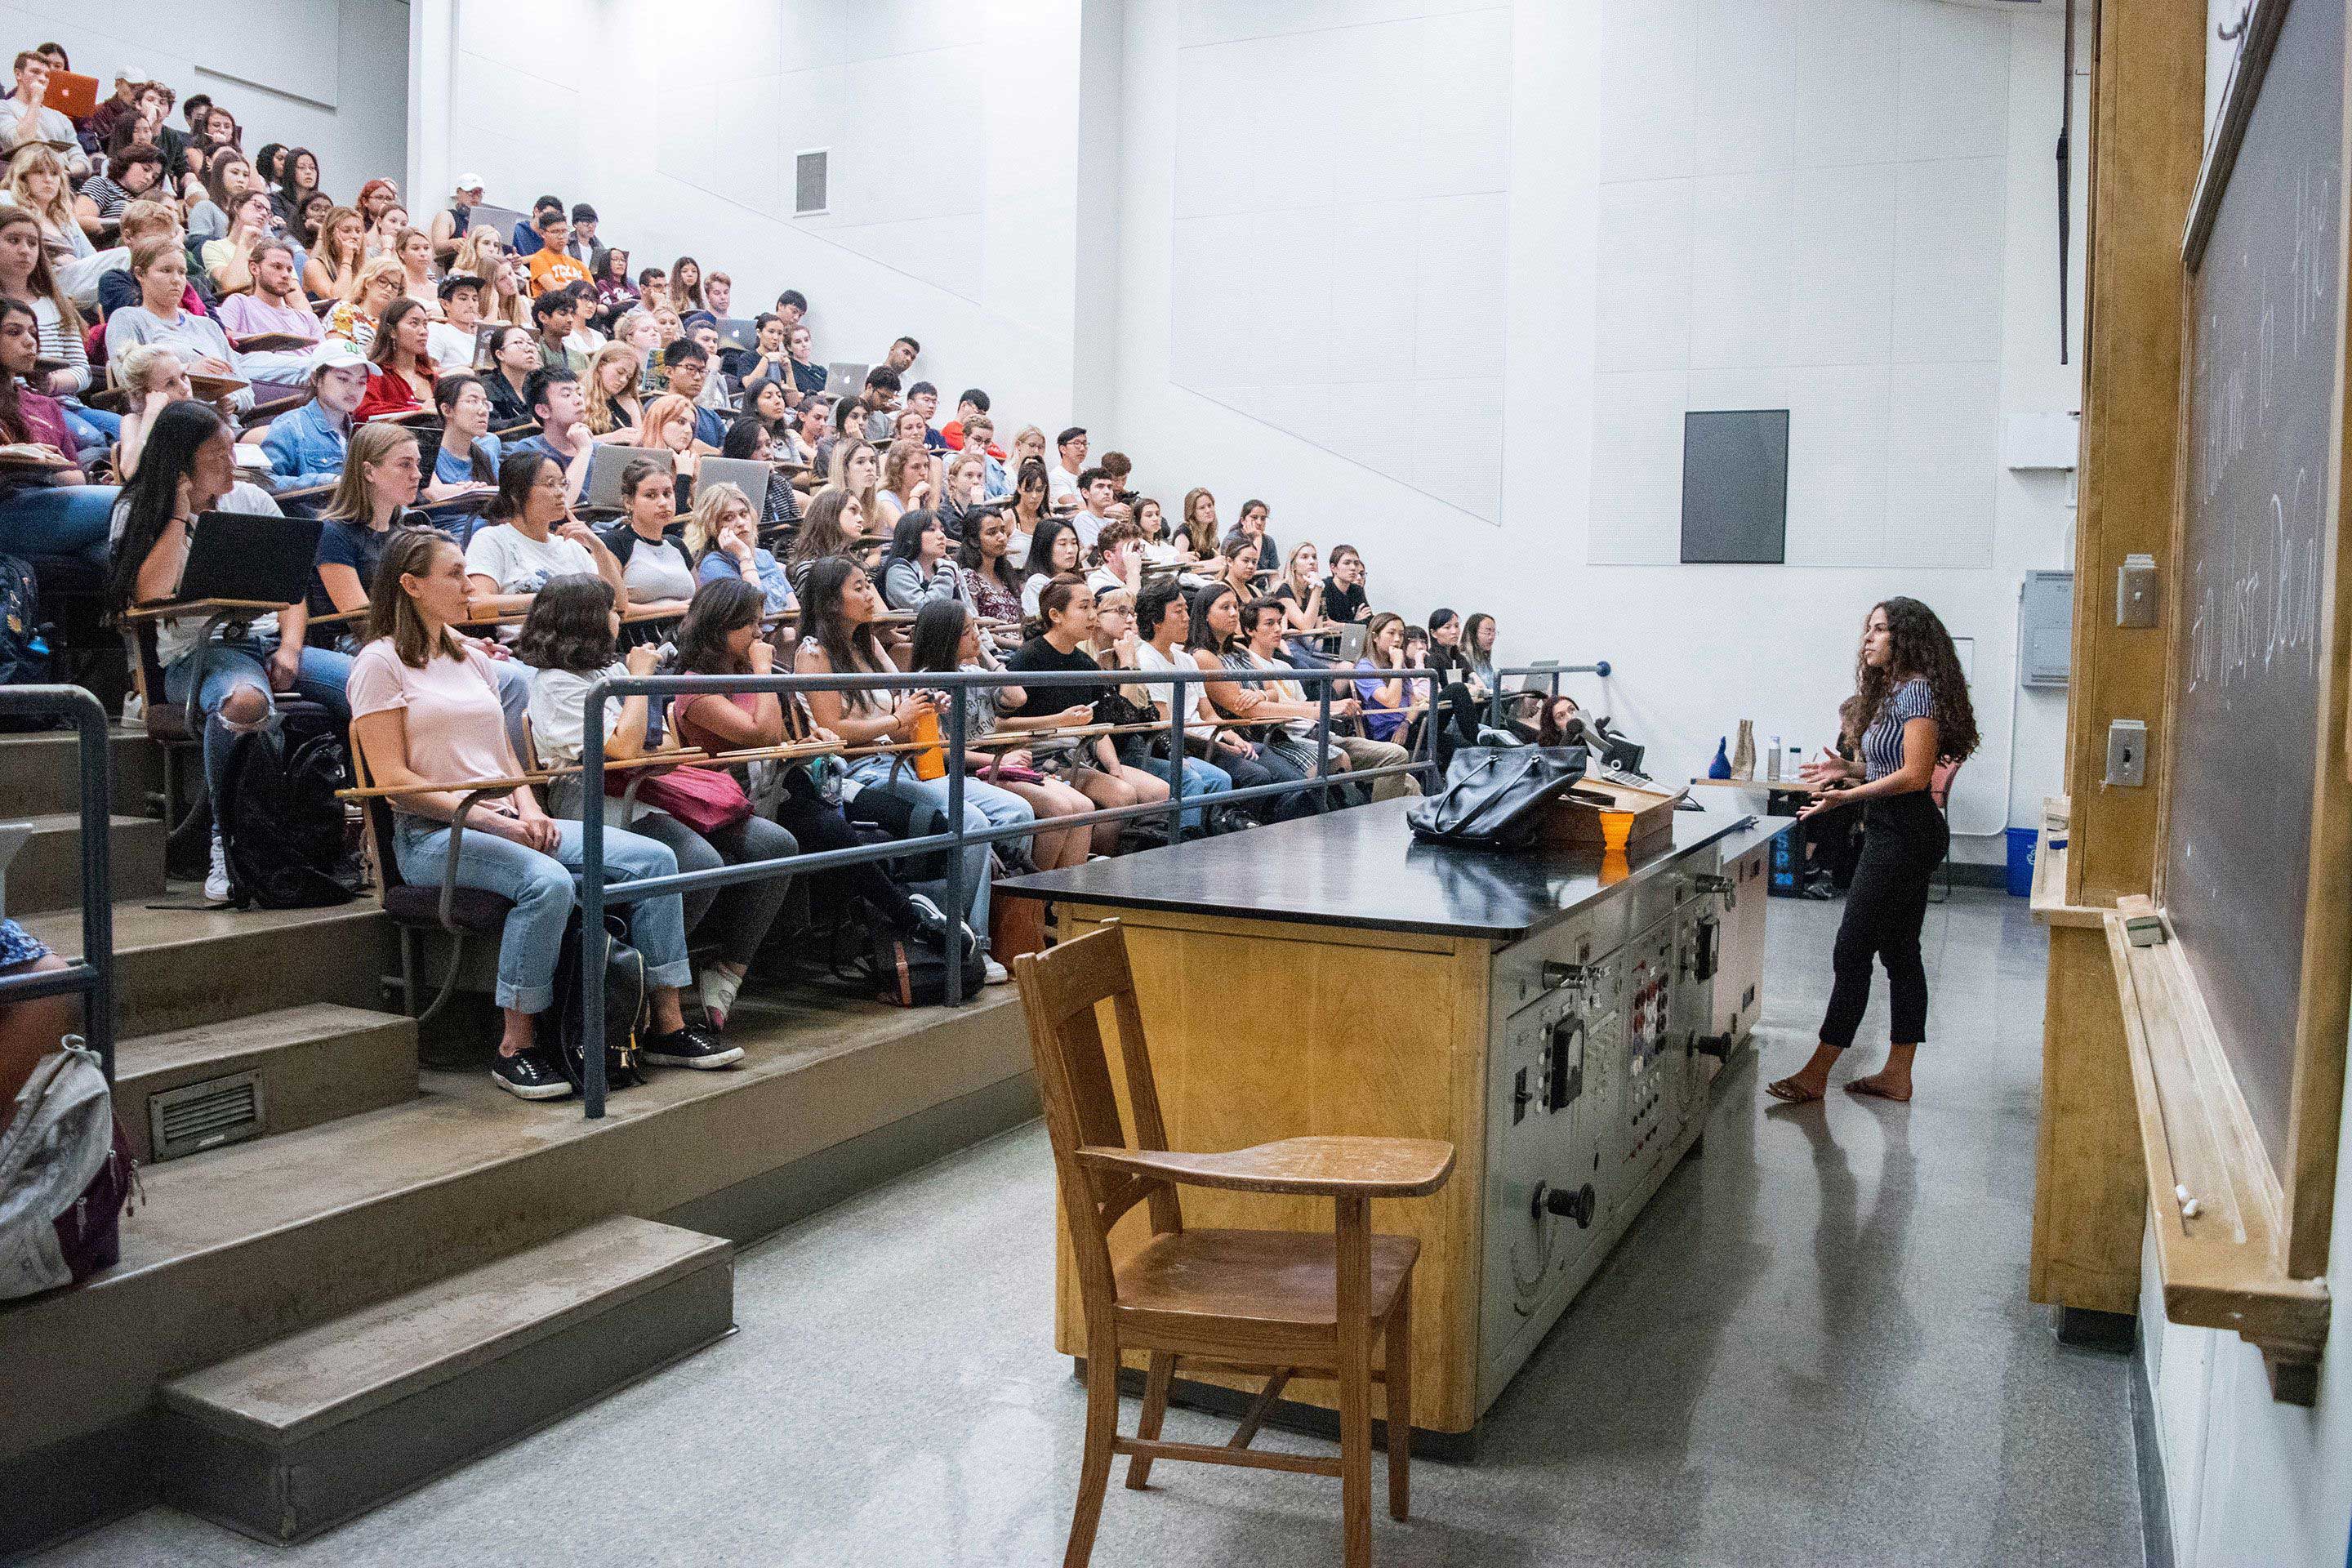 A large lecture hall filled with students and a young woman talking at the front of the room